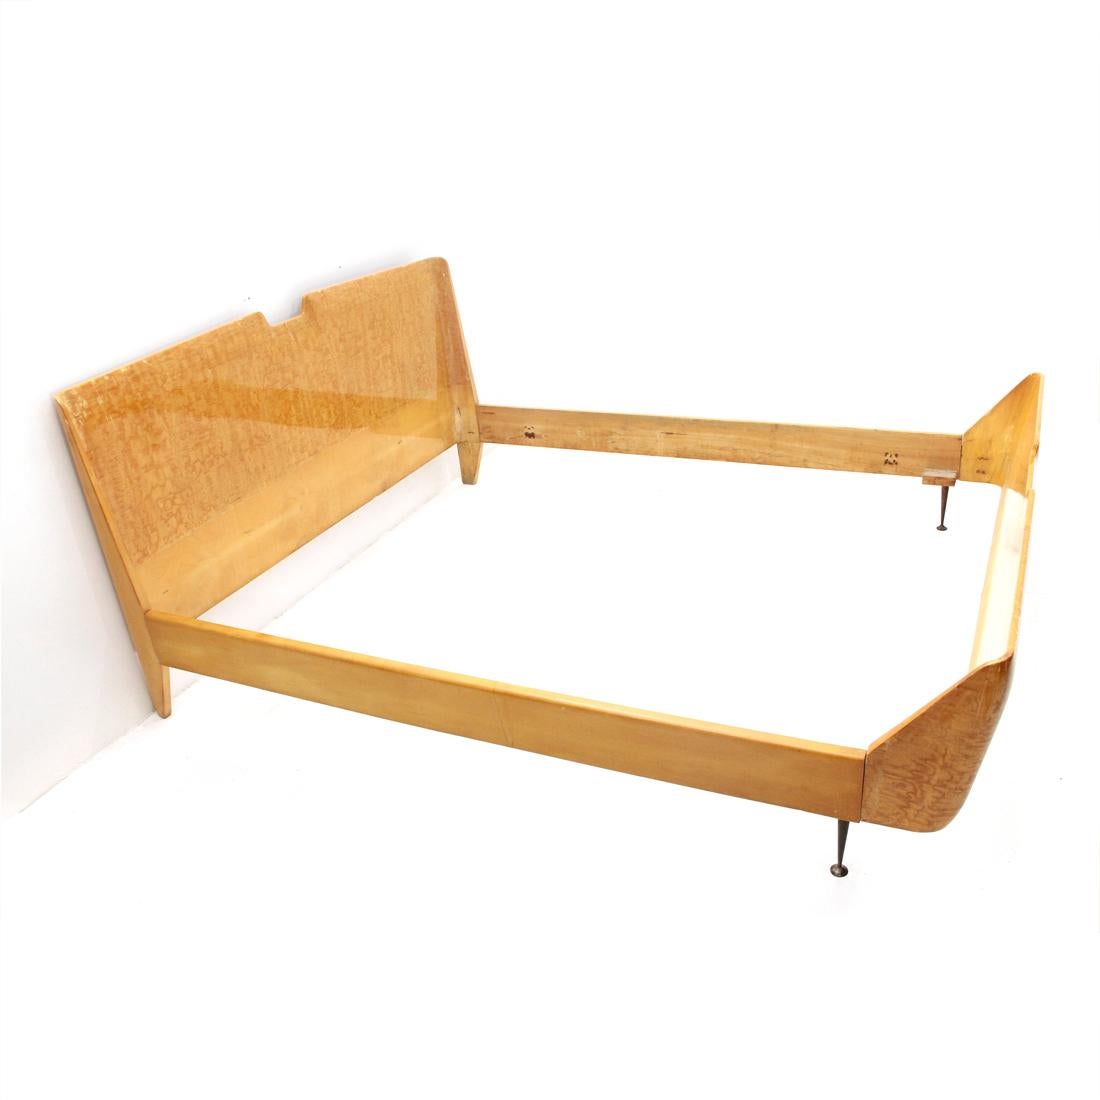 Italian manufacture bed produced in the 1950s.
Structure in wood veneer in Tamos, Japanese wood.
Brass legs.
Good general conditions, some signs due to normal use over time, support bed base absent.
It accommodates a mattress max 168 x 195